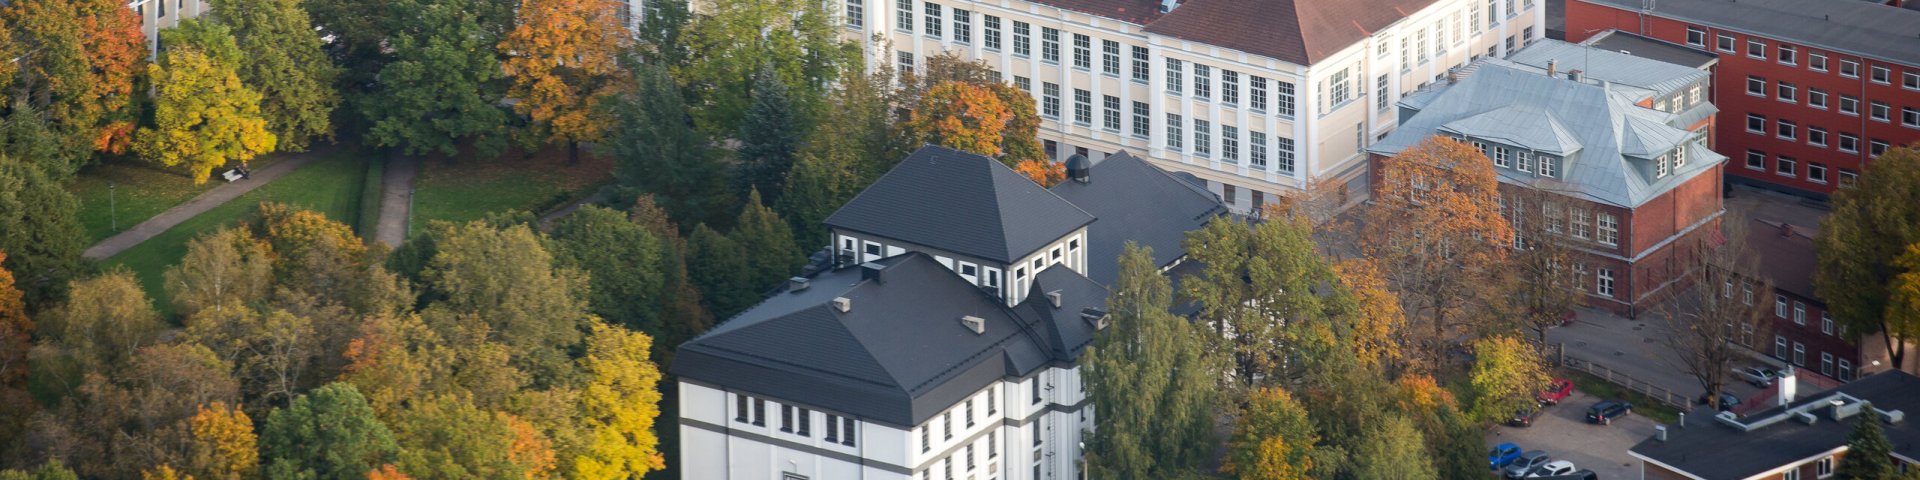 Bird-eye view of Vanemuise 46 building. The main venue for the conference.